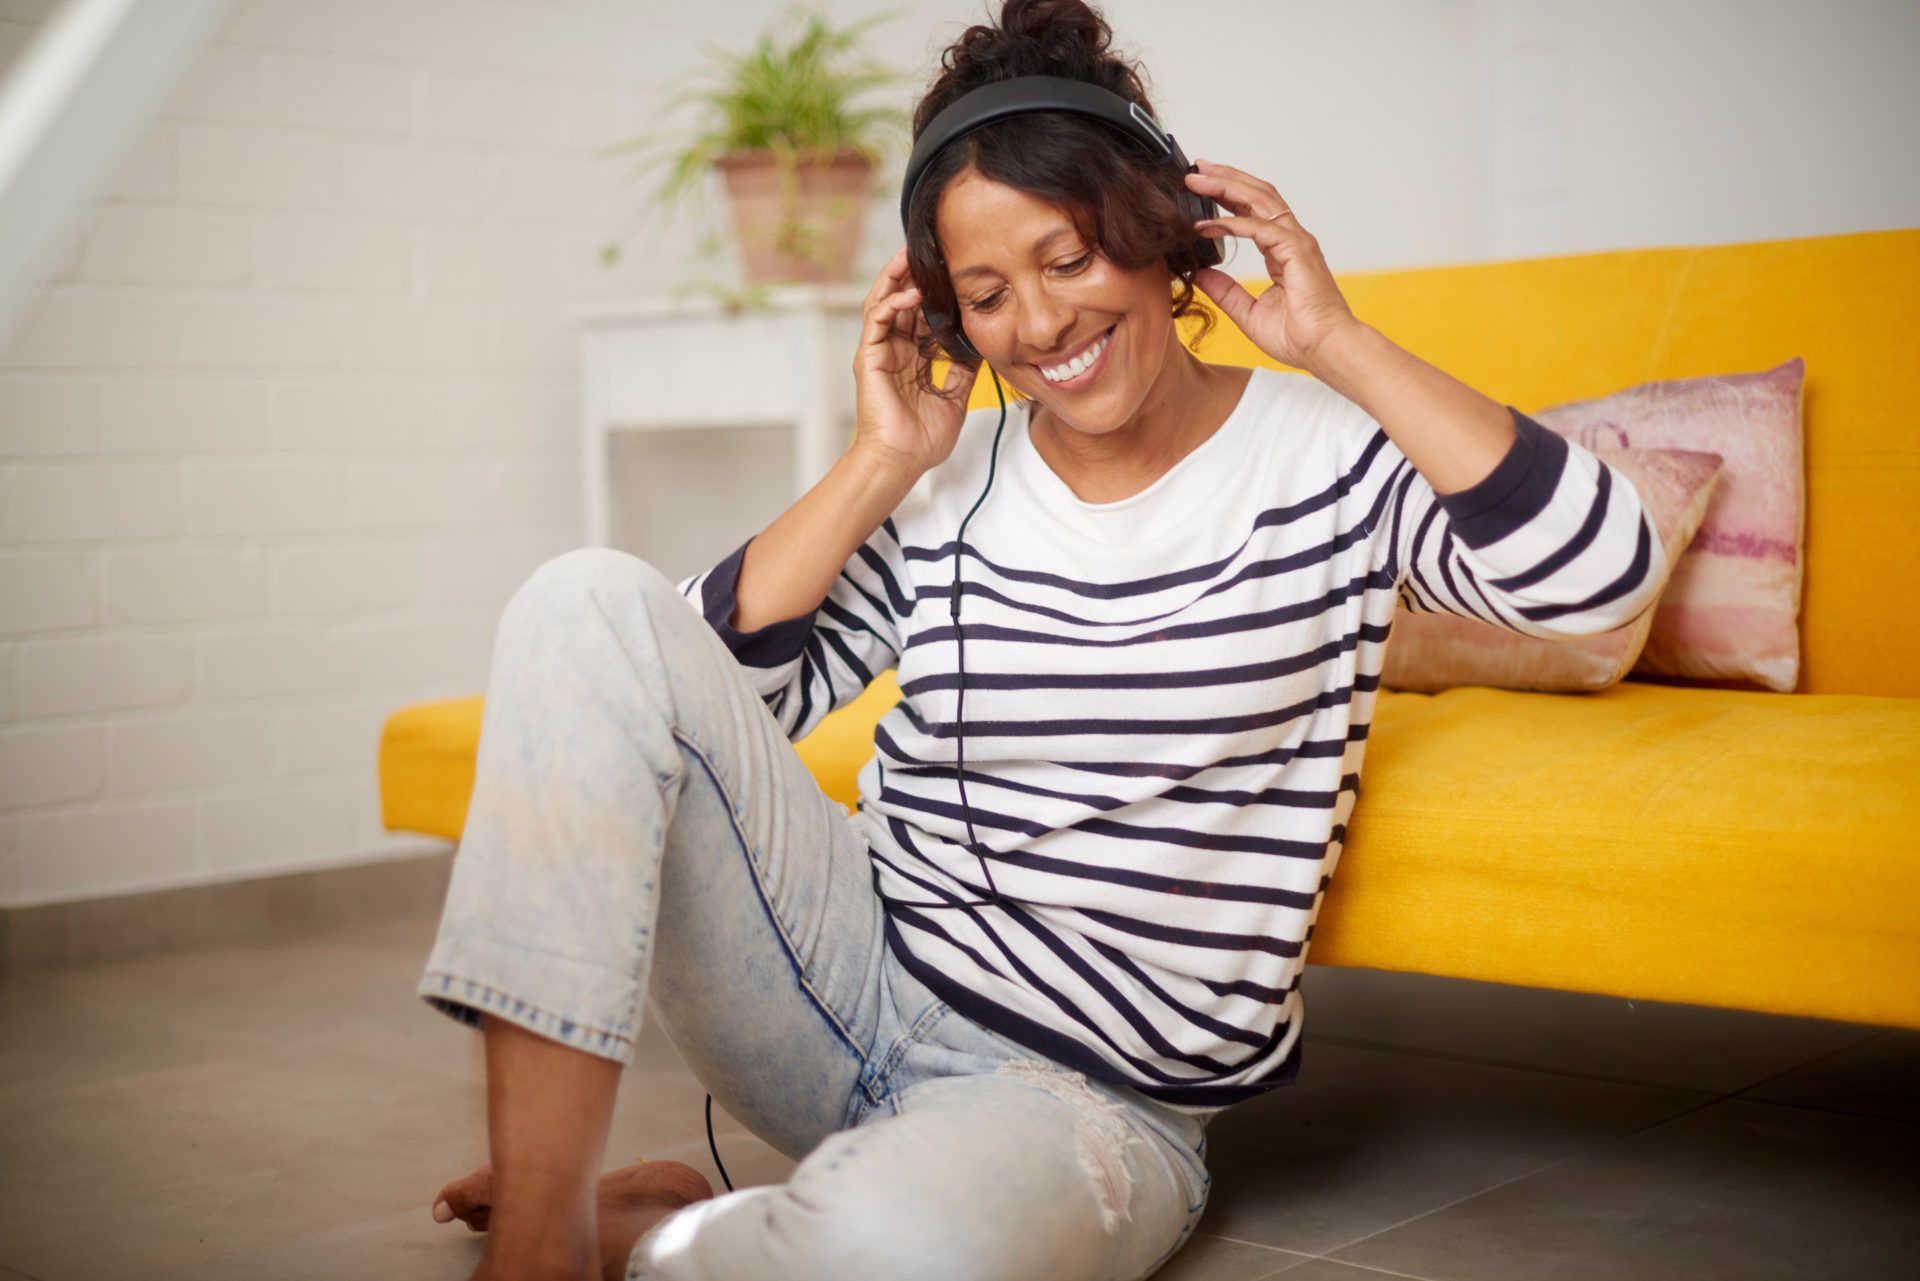 Music, relax and retirement with a senior or elderly woman listening with headphones on the floor at home. Carefree time to listen to the radio or audio while resting and relaxing in the living room